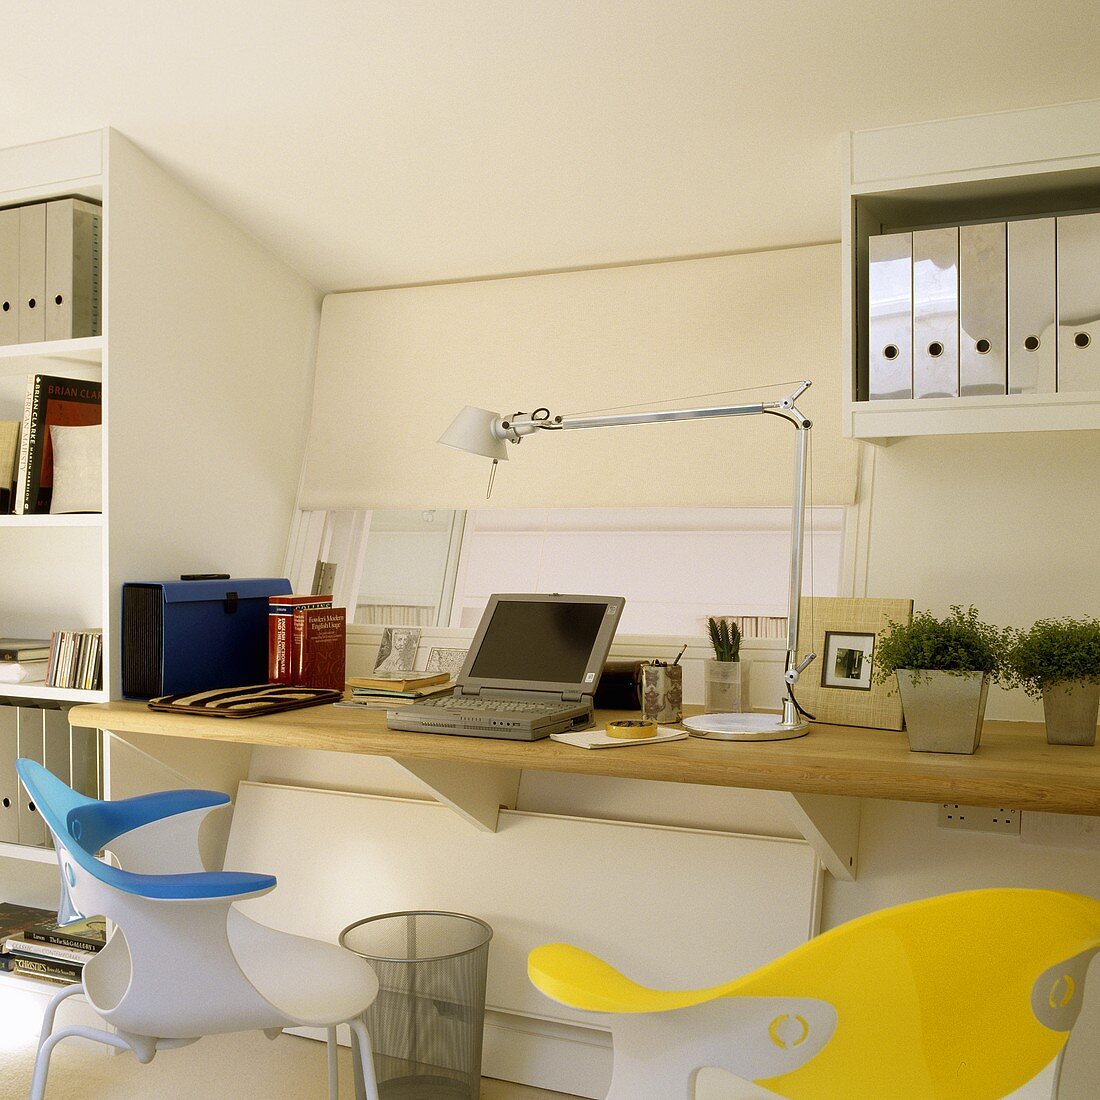 A desk with a wooden work surface mounted on wall brackets with coloured bucket chairs